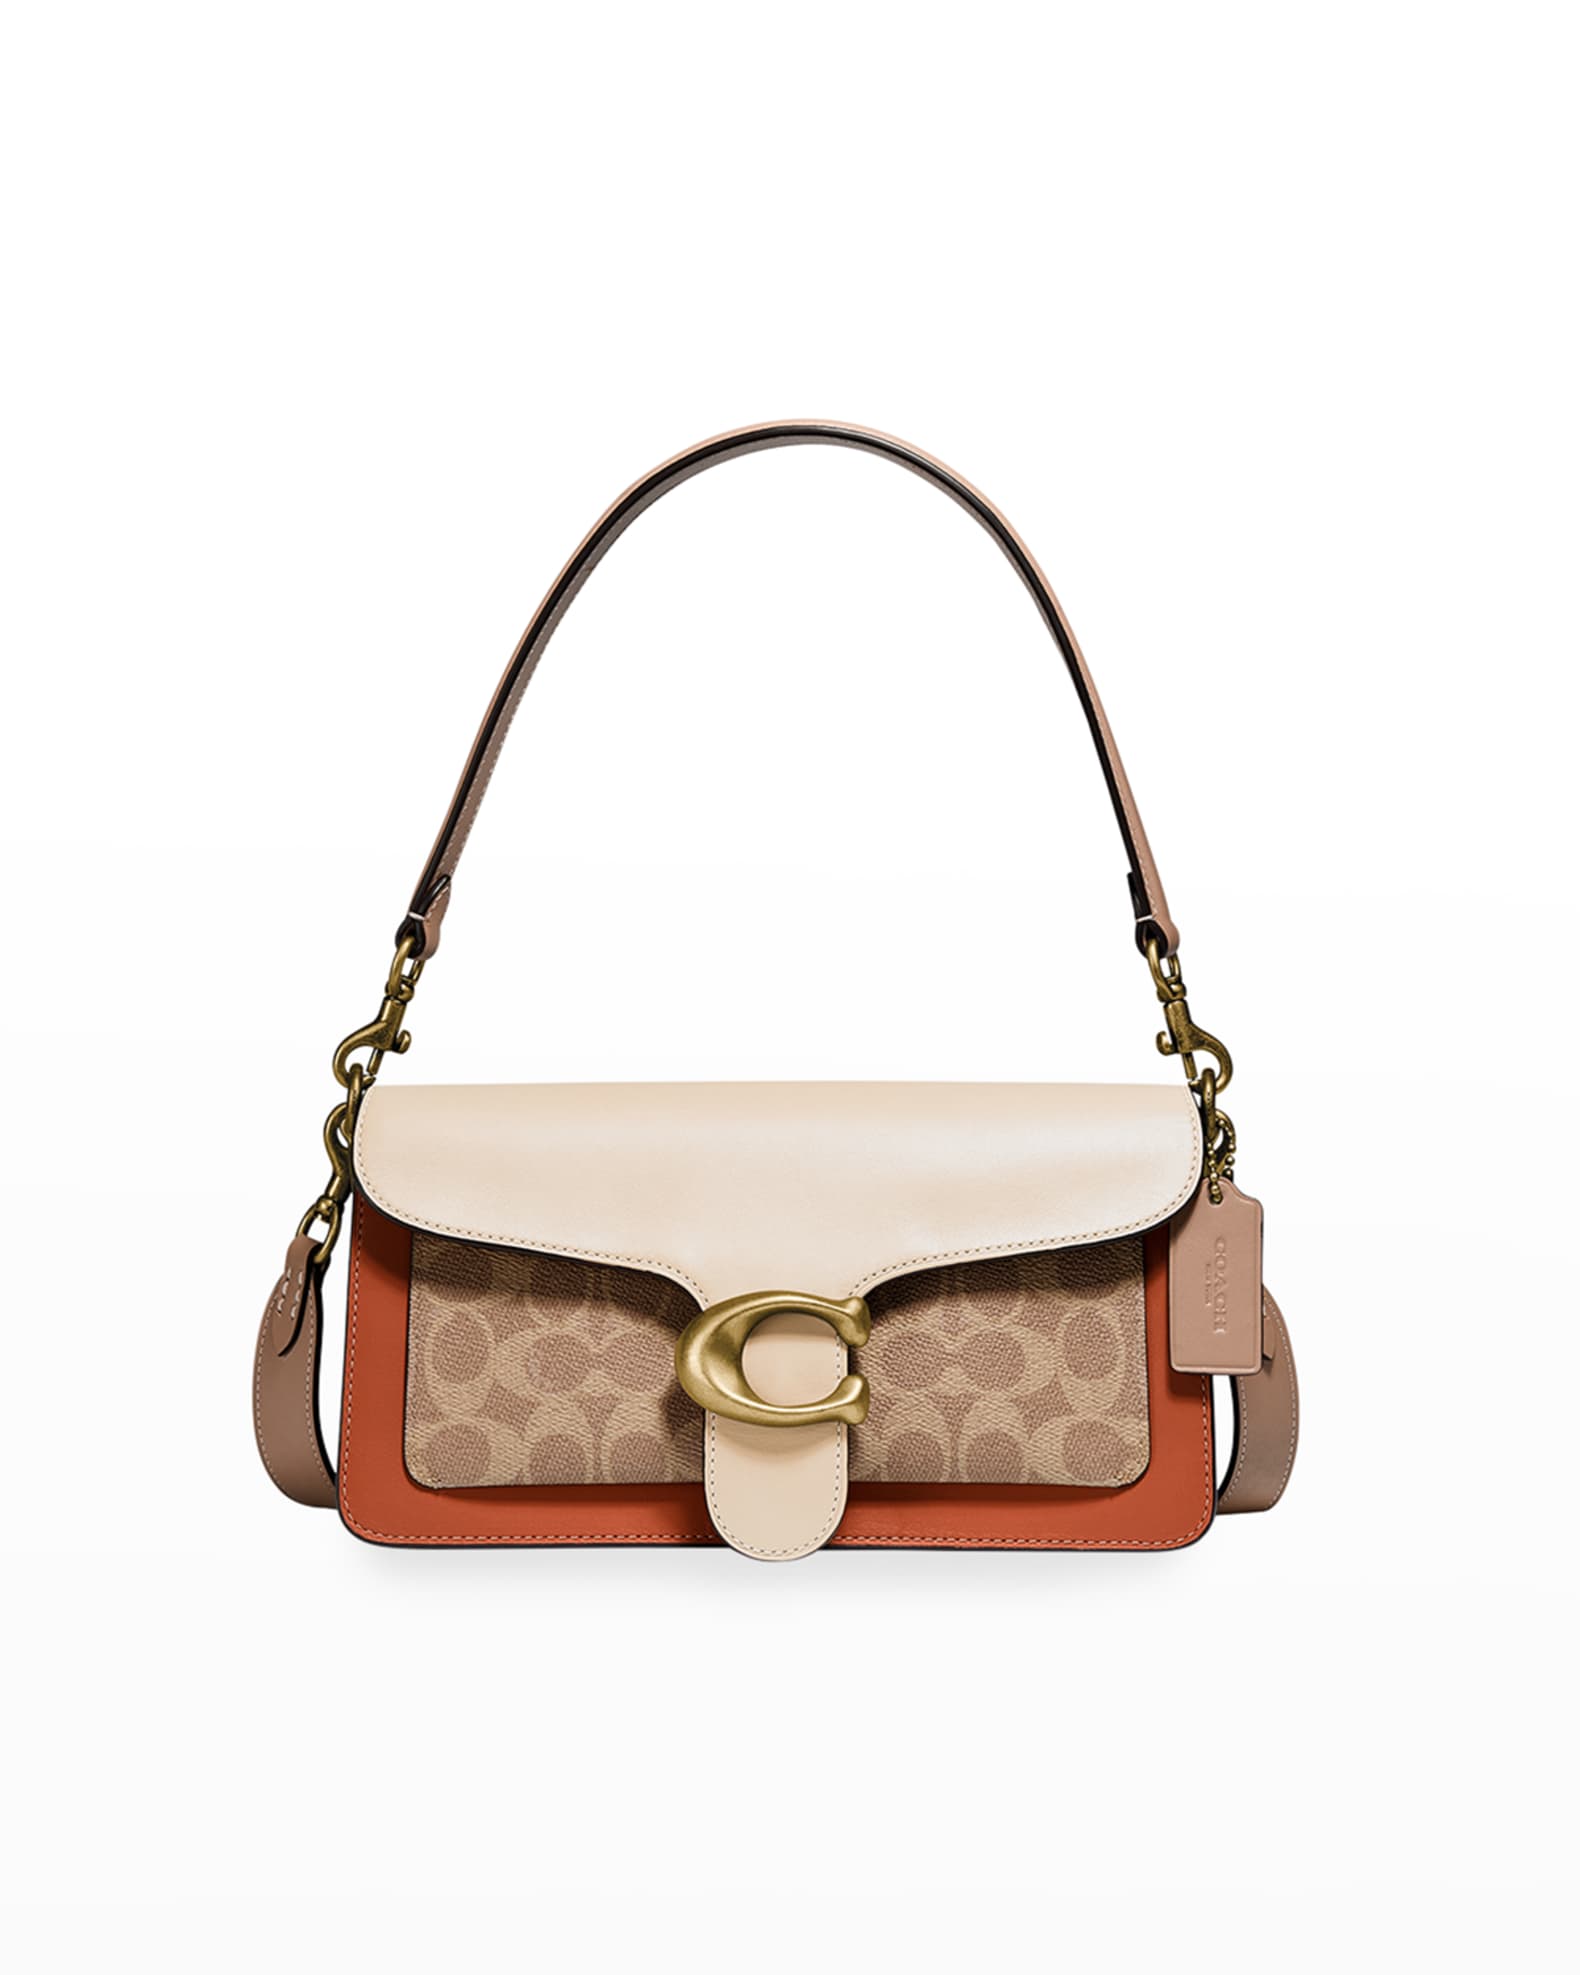 Coach 1941 Tabby Coated Canvas & Leather Shoulder Bag | Neiman Marcus